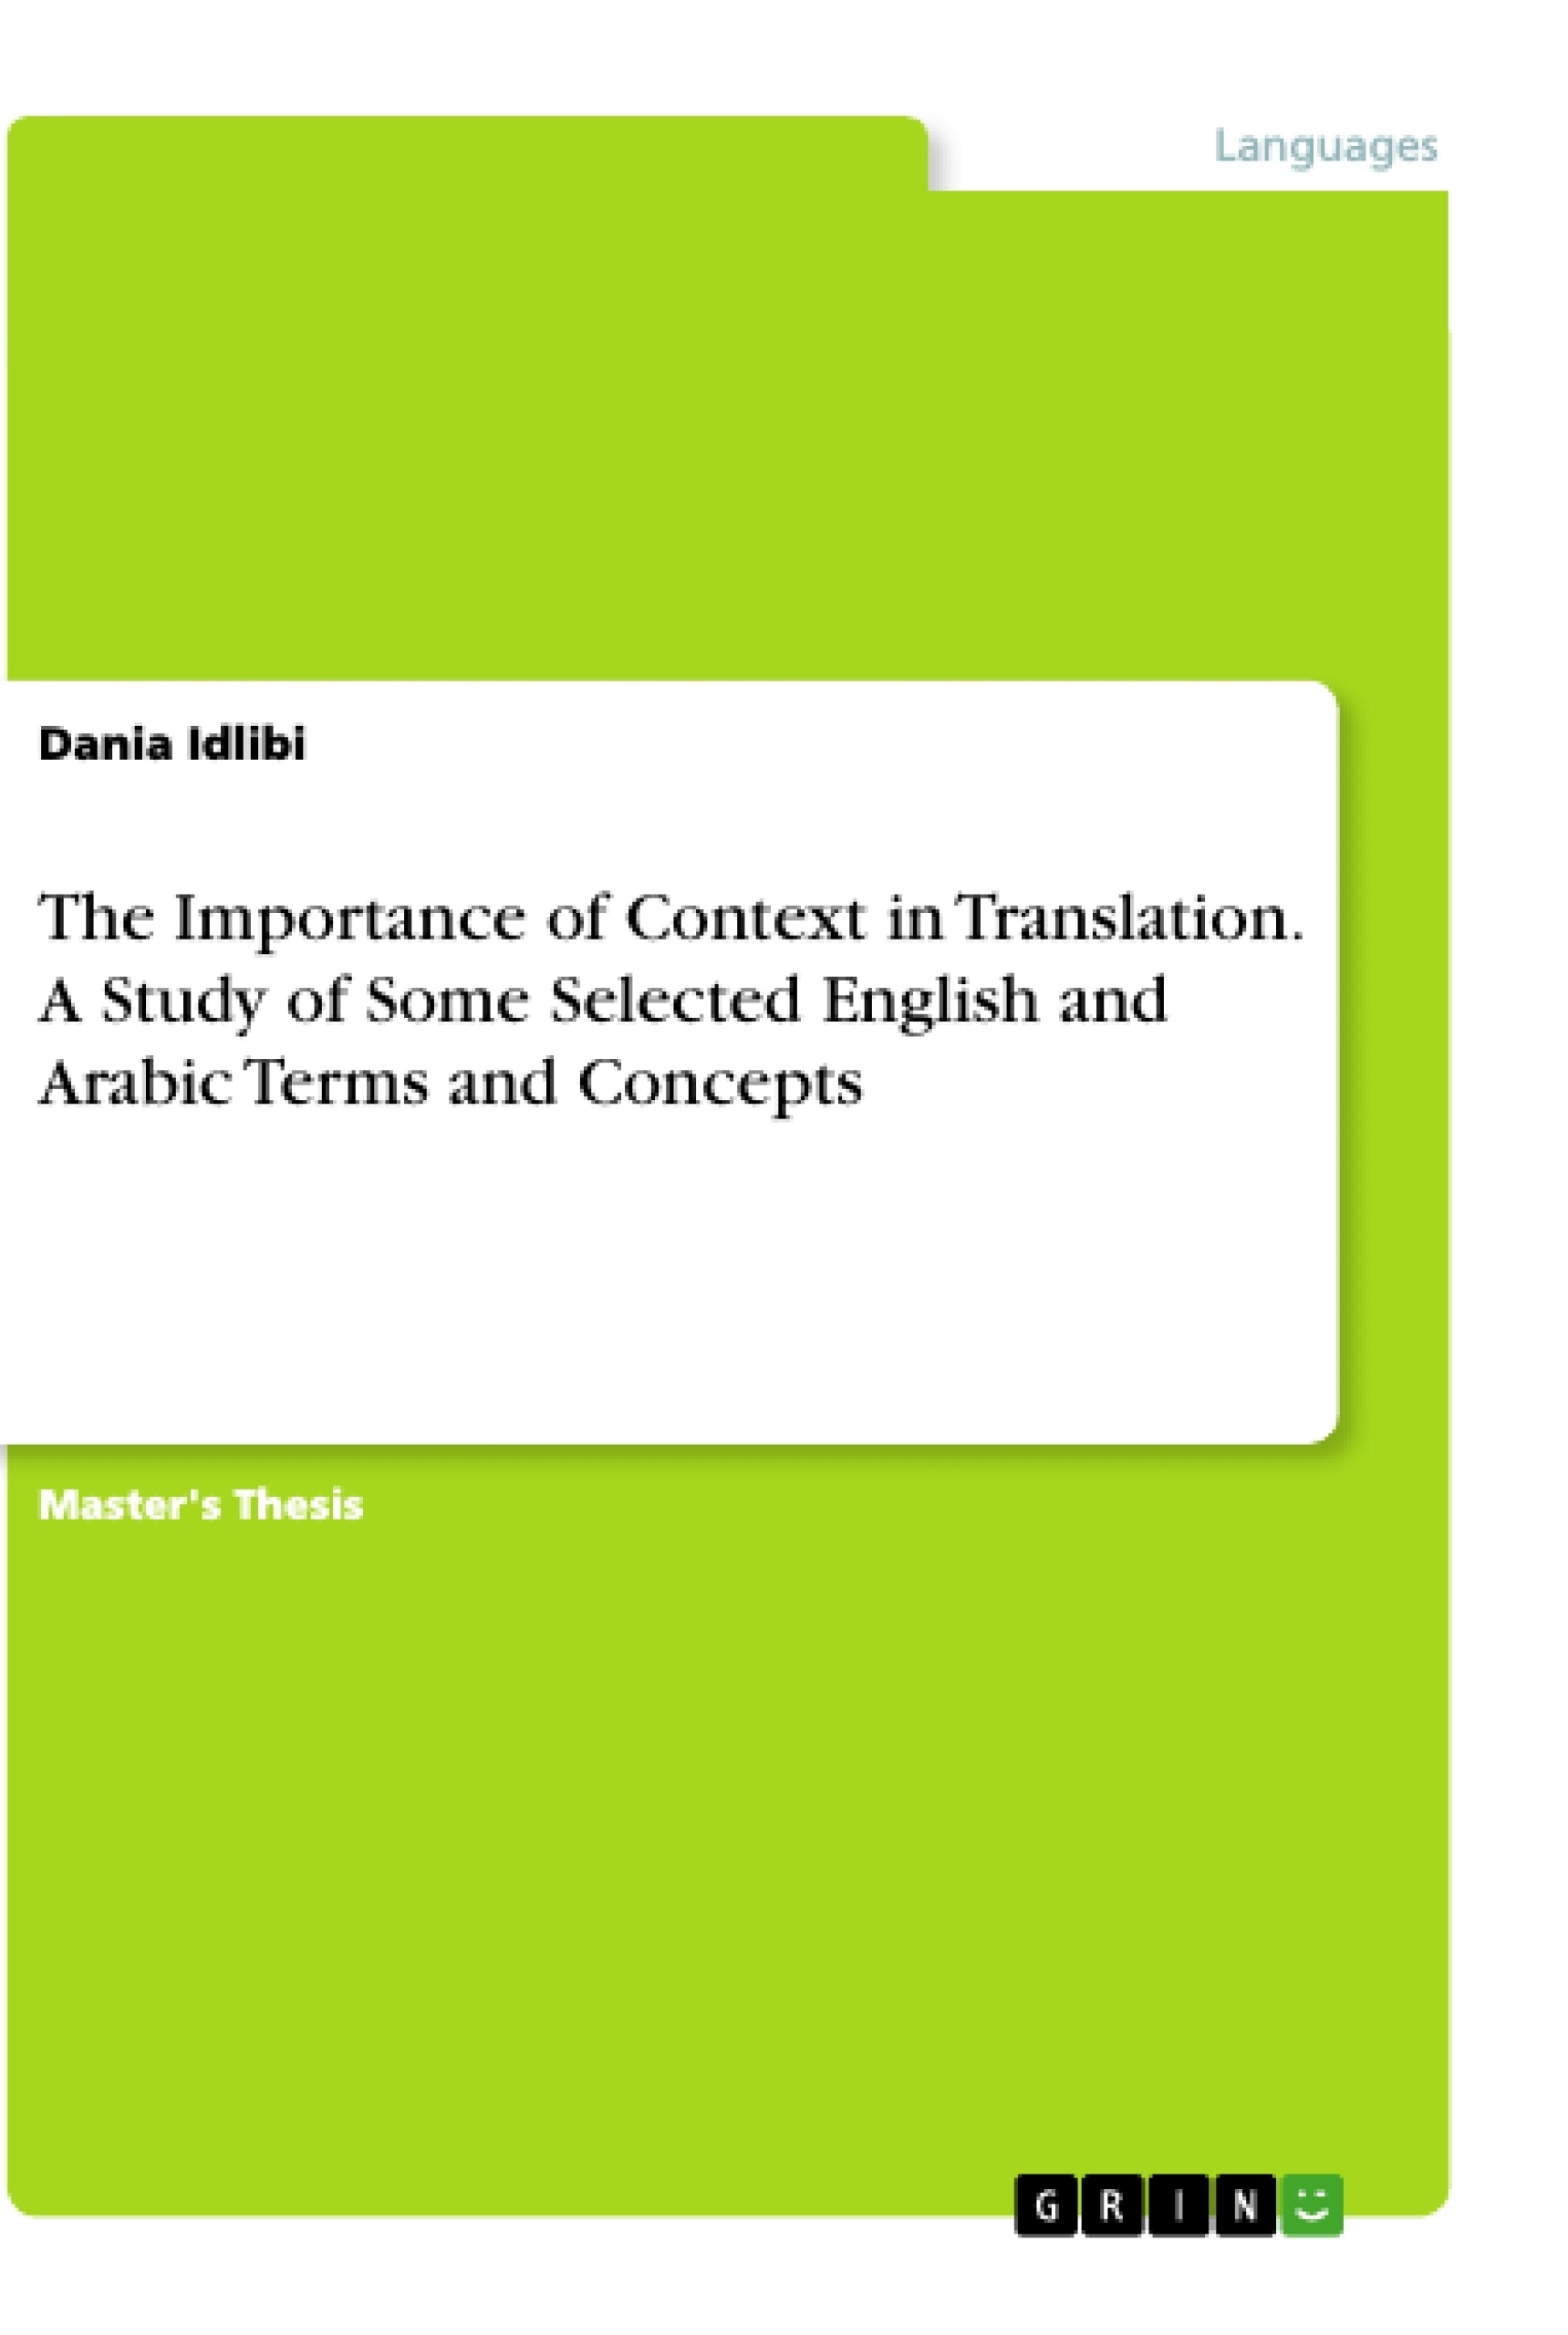 Titre: The Importance of Context in Translation. A Study of Some Selected English and Arabic Terms and Concepts